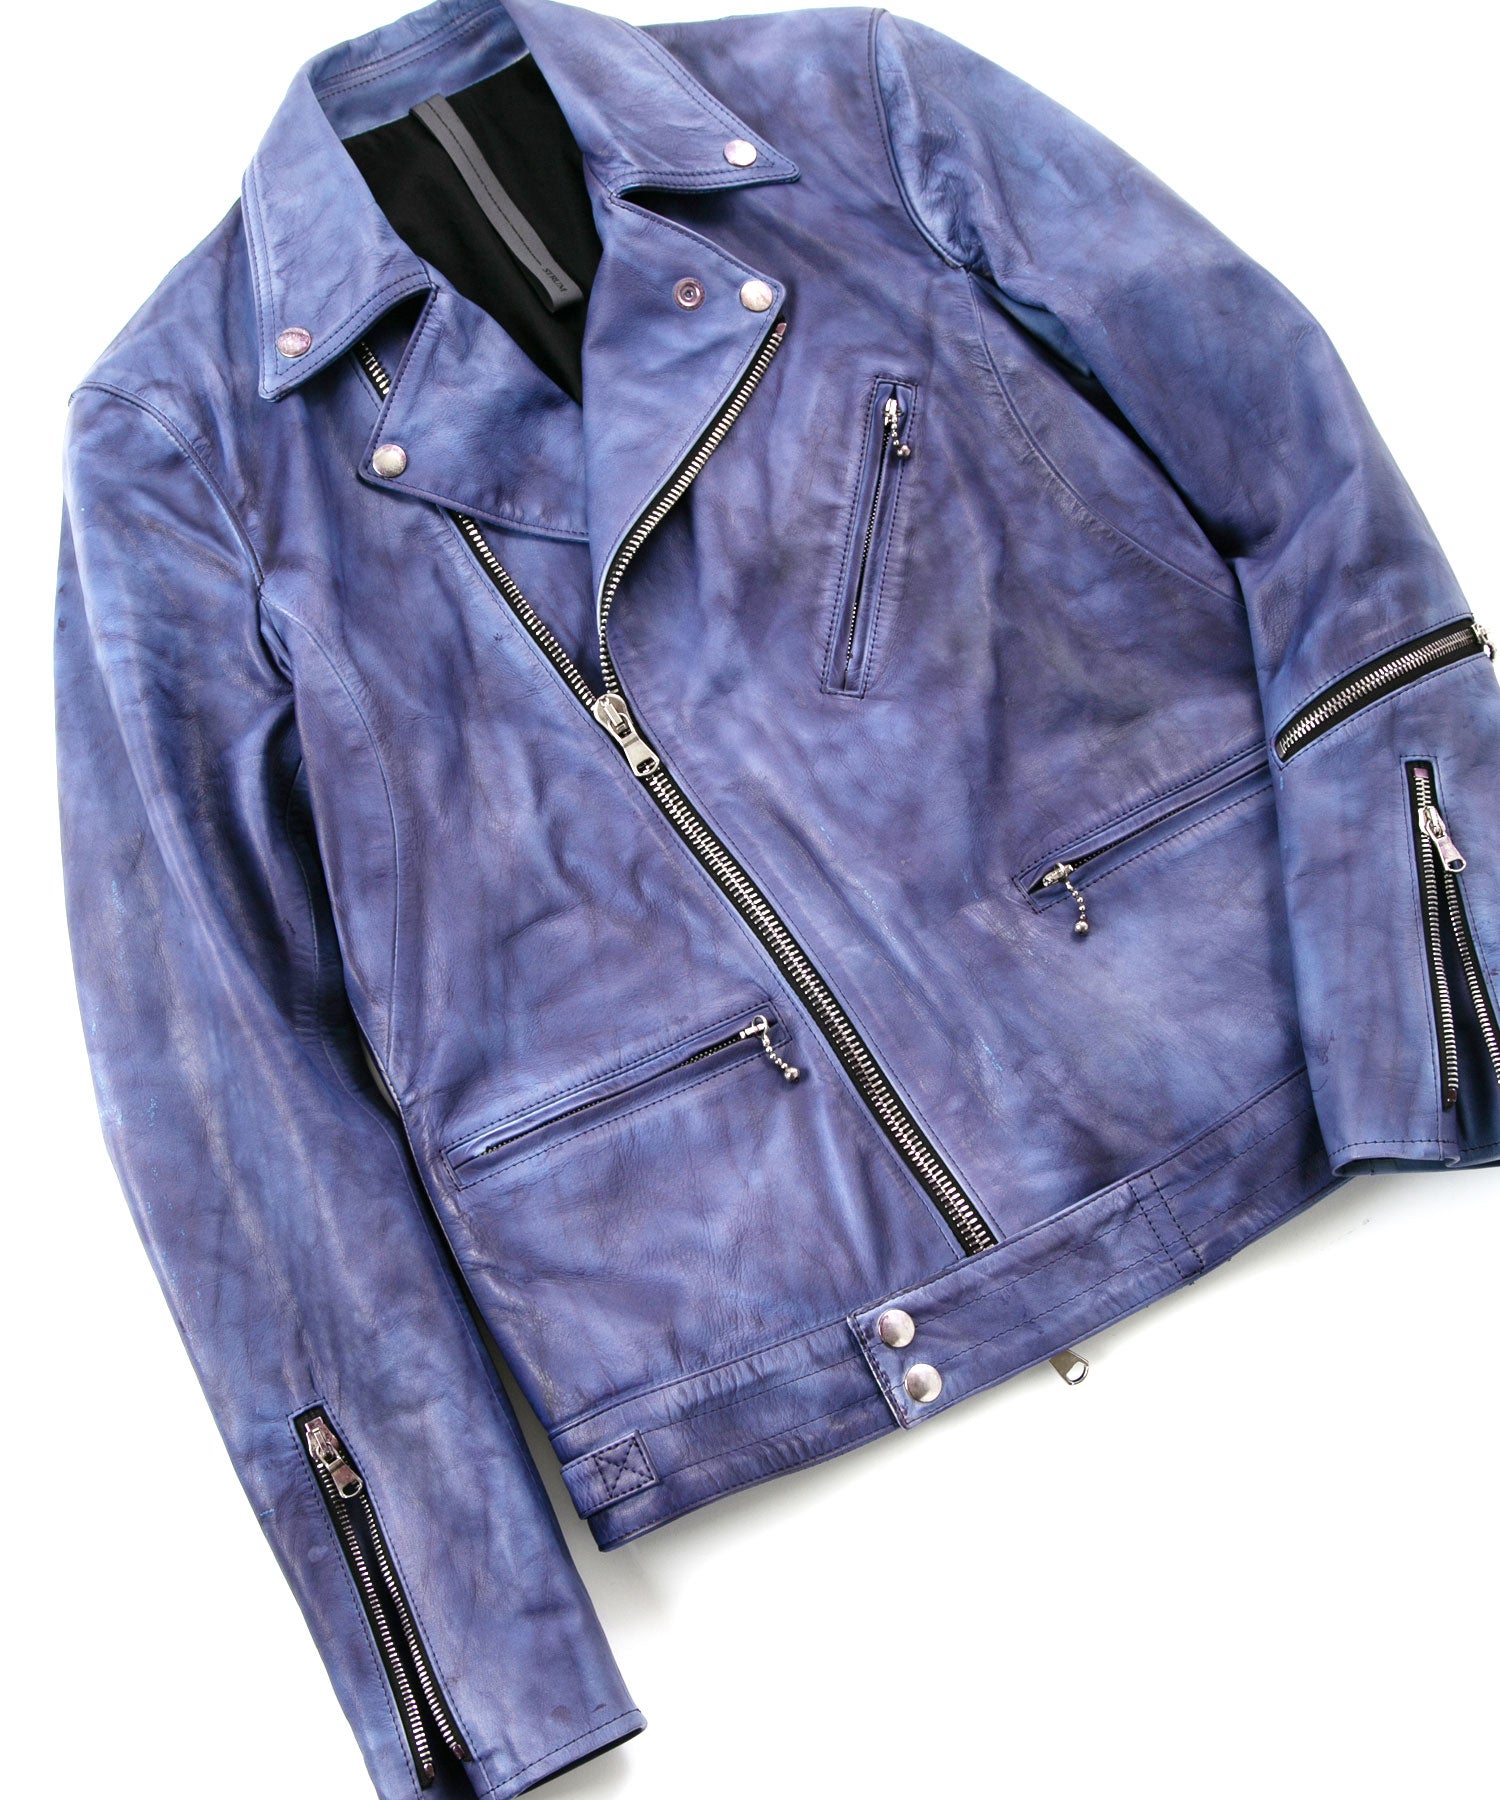 Load image into Gallery viewer, [Burning dyed] Domestic Vegetable Full Tanned Steer Double Riders jacket